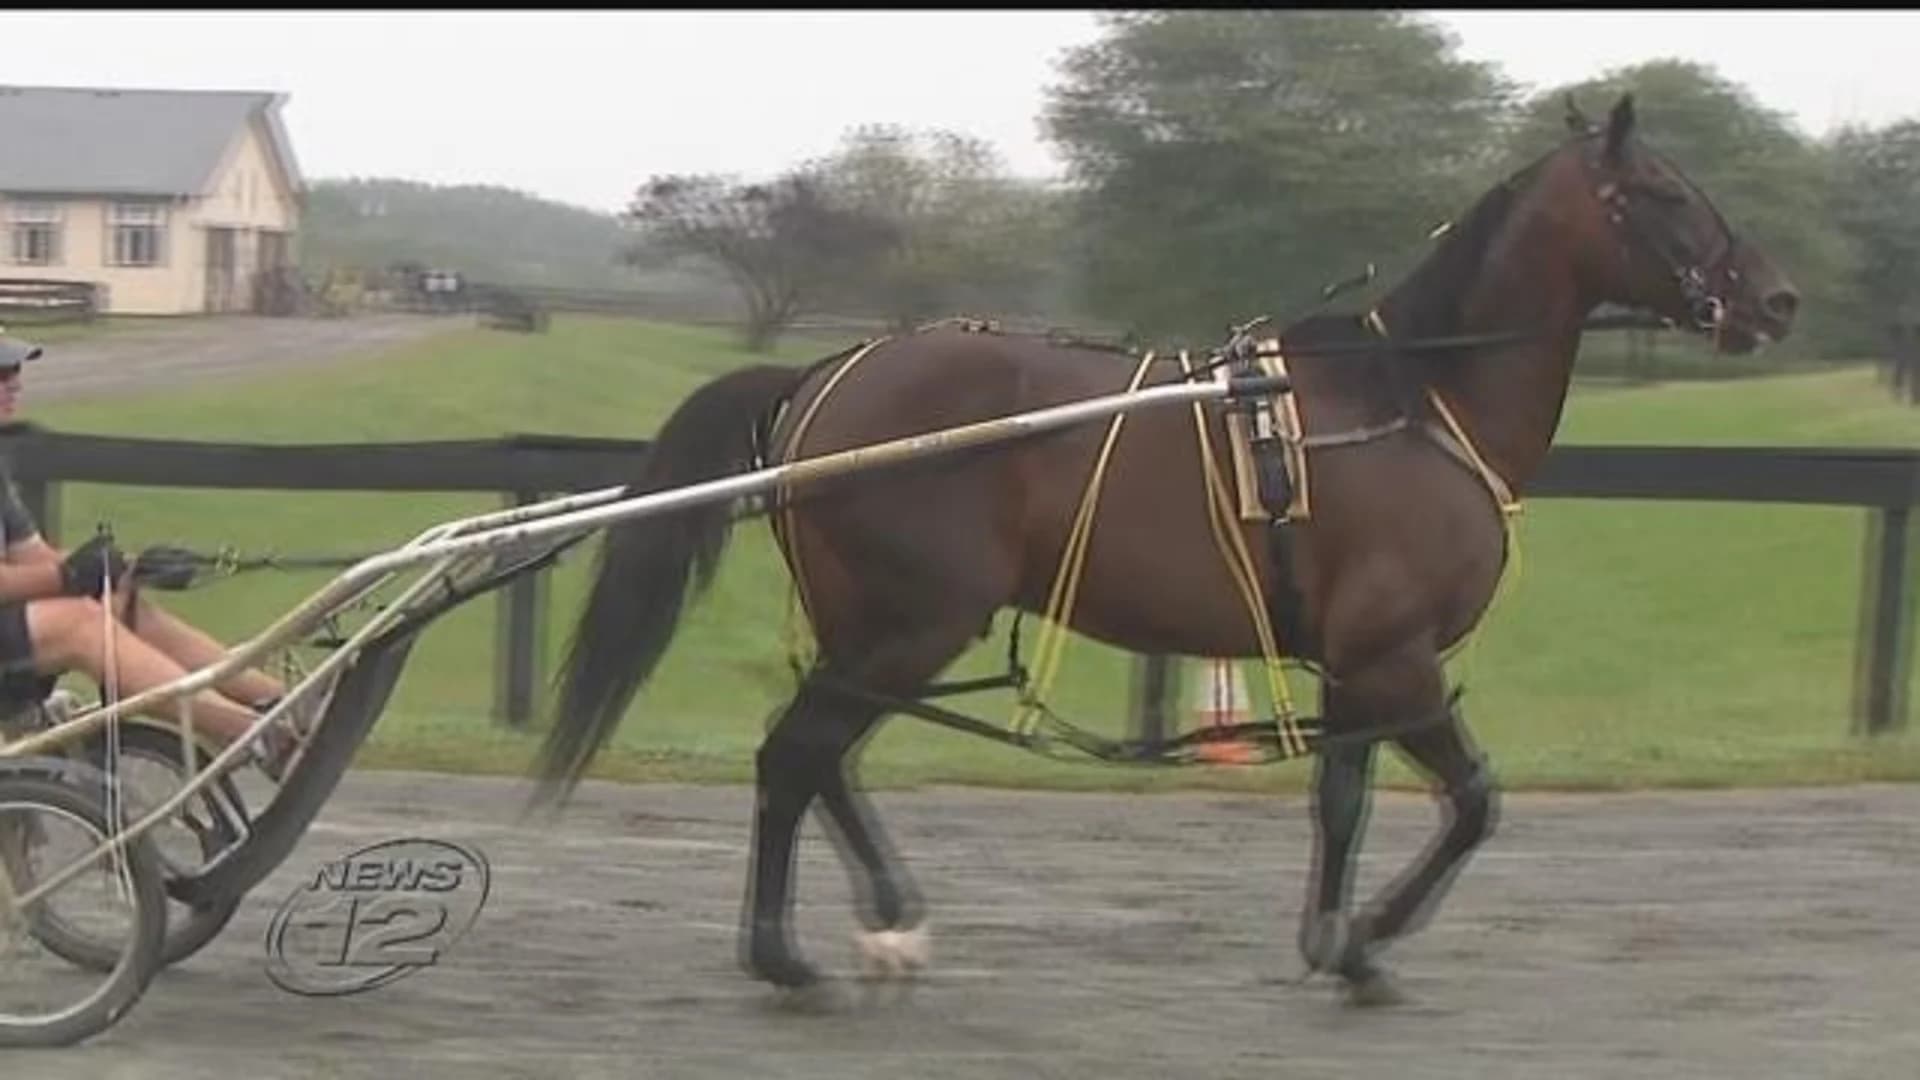 Record-setting harness racing horse retires at age 14